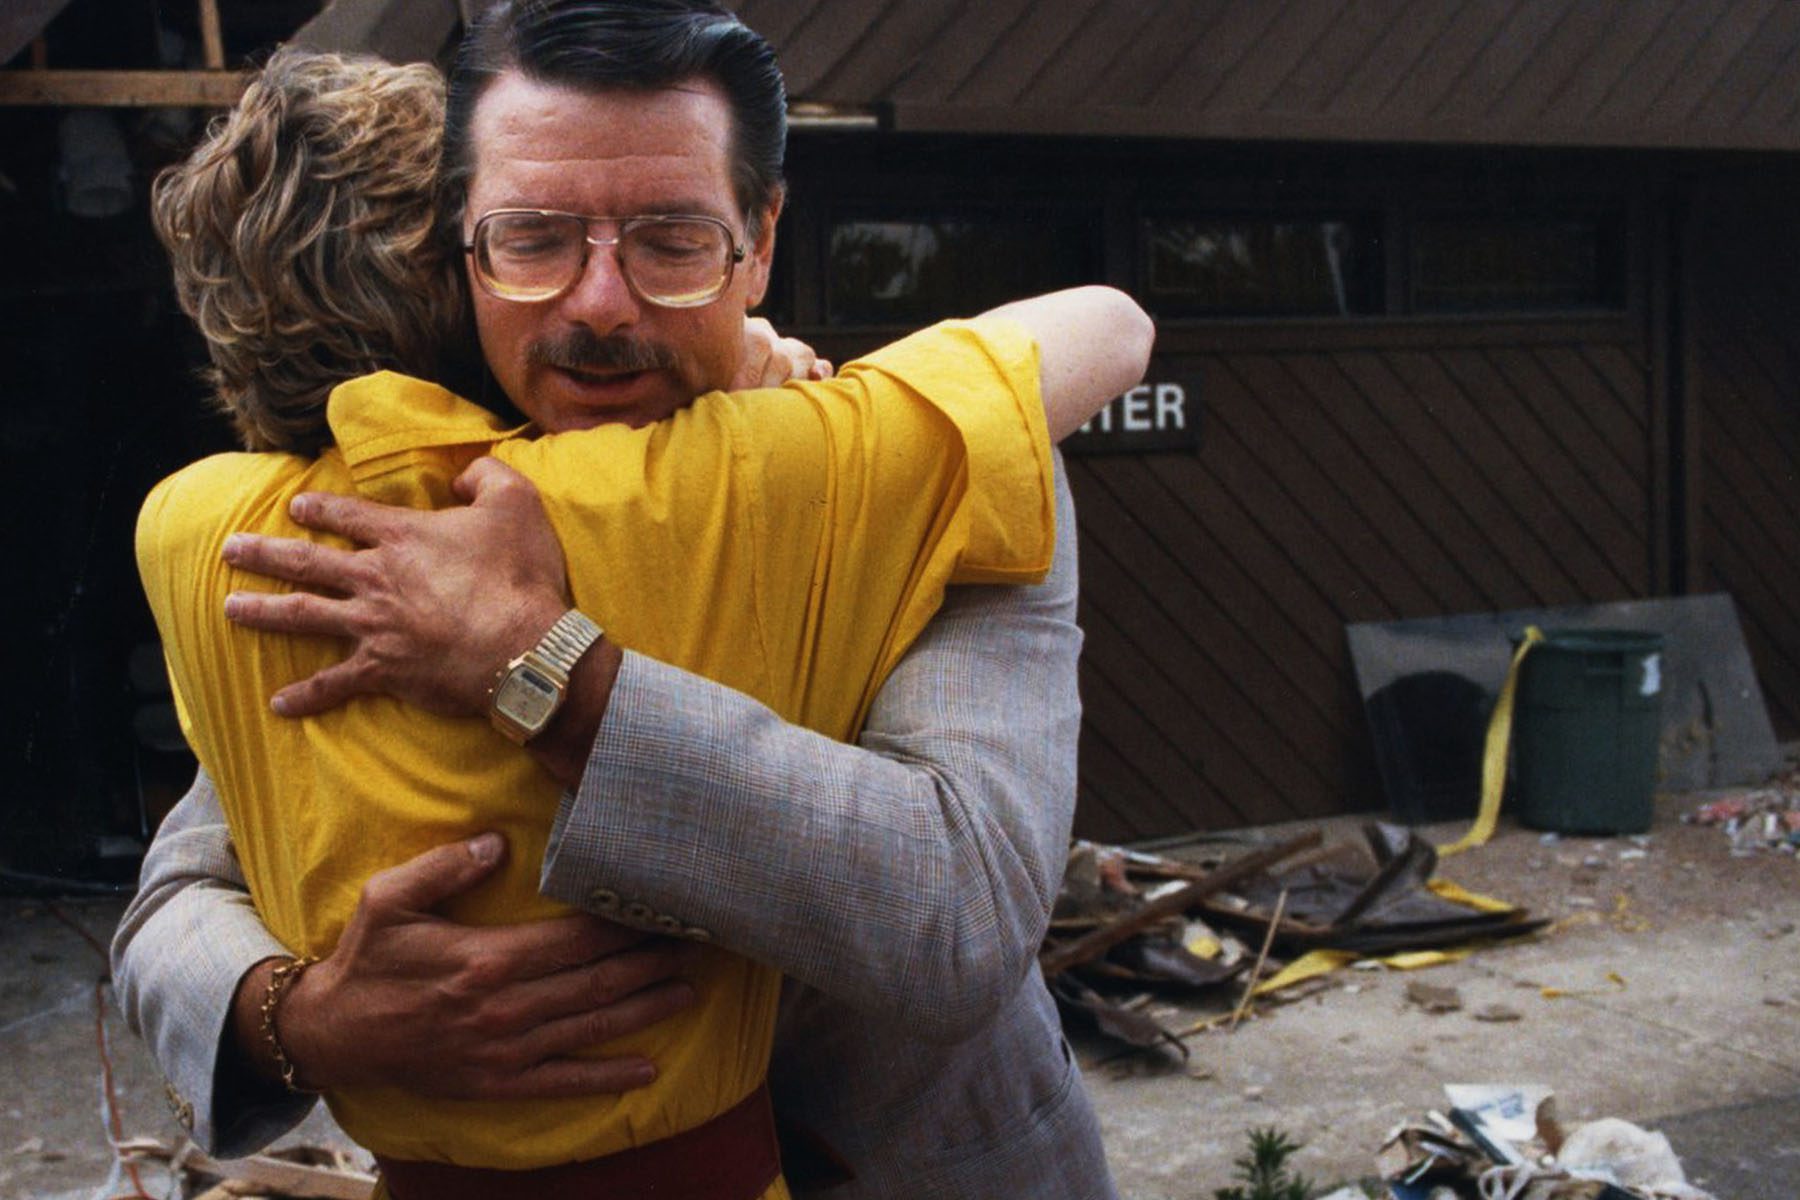 Dr. George Tiller hugs a woman. Behind him are piles of wood and trash from the bombing.